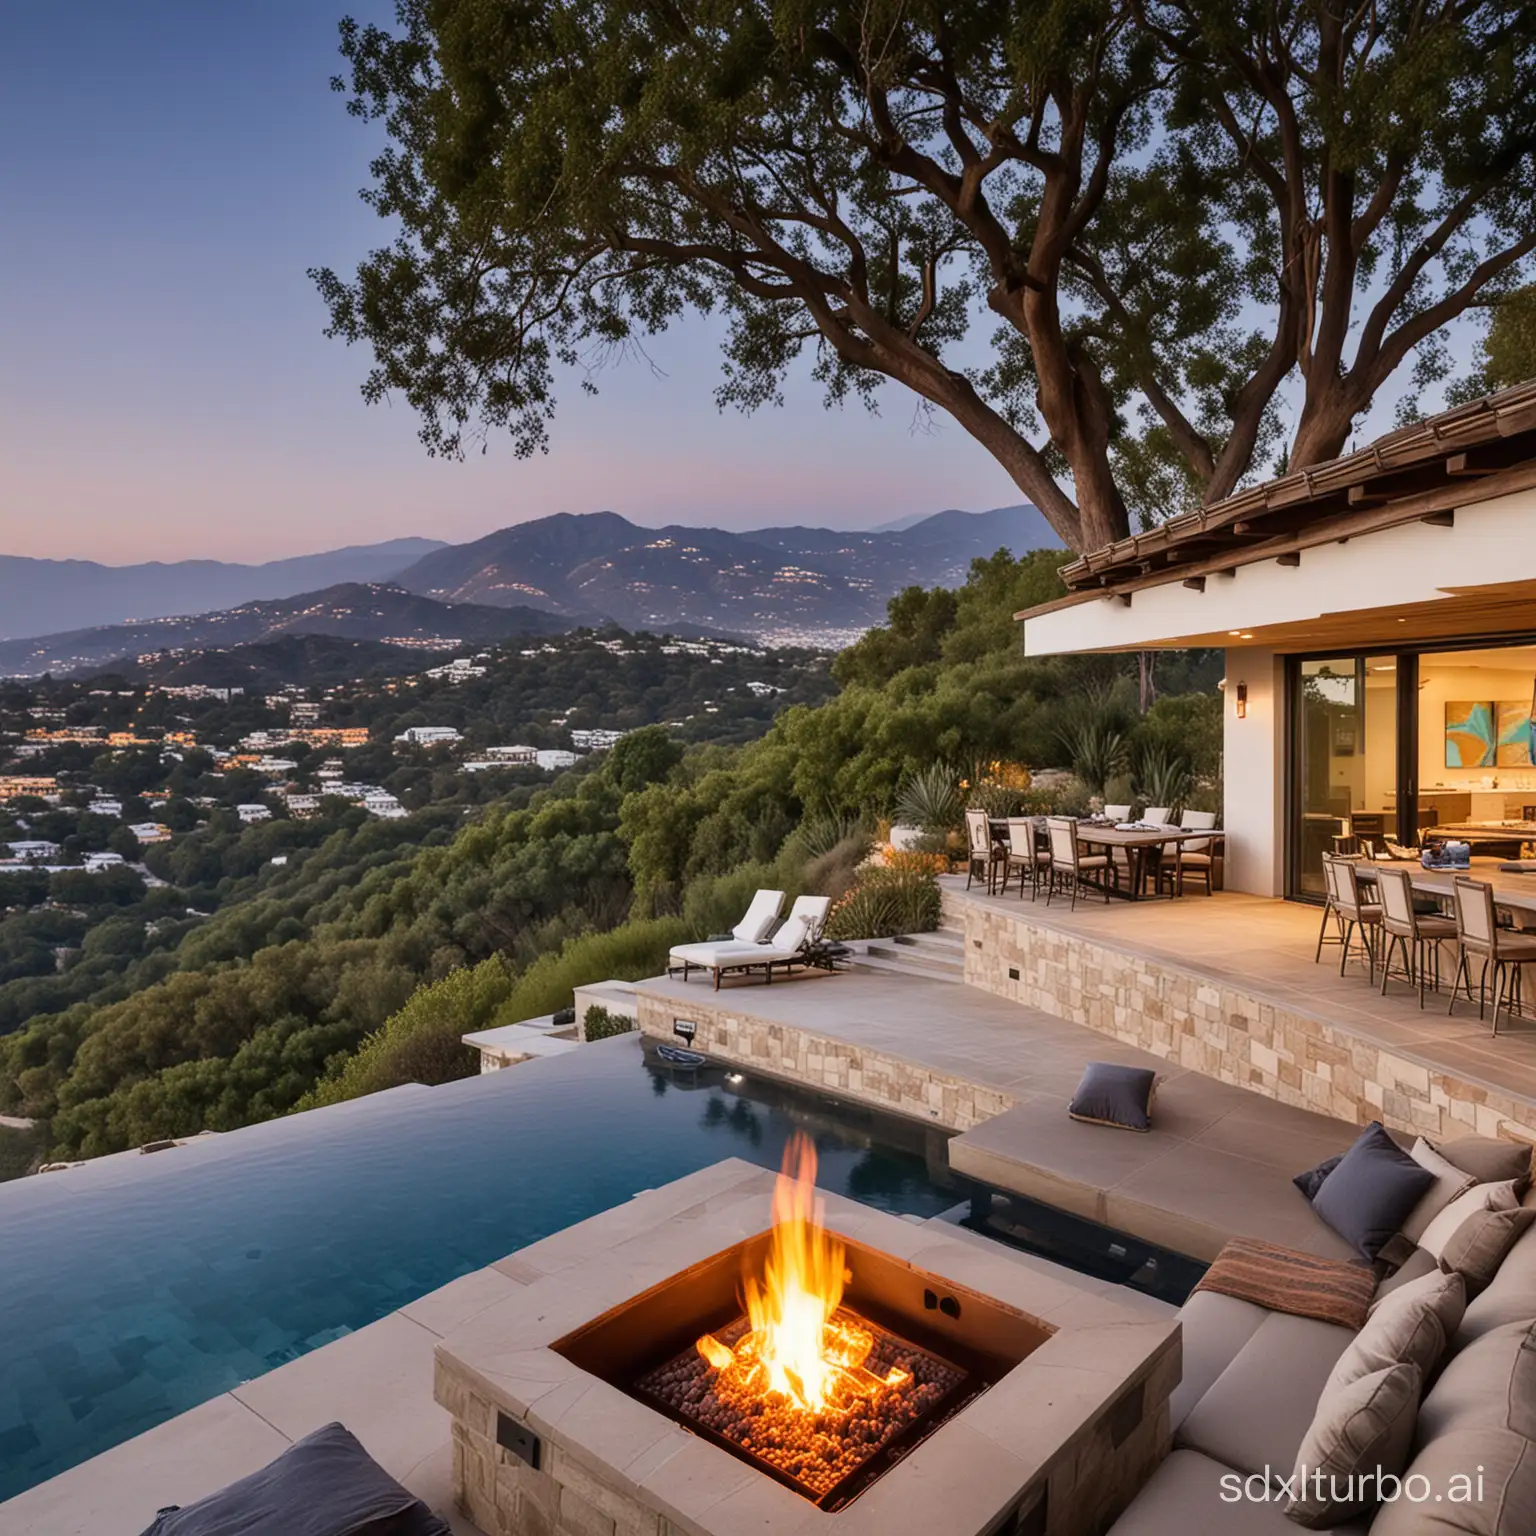 Luxurious-Outdoor-Living-Infinity-Pool-with-Mountain-View-and-Firepit